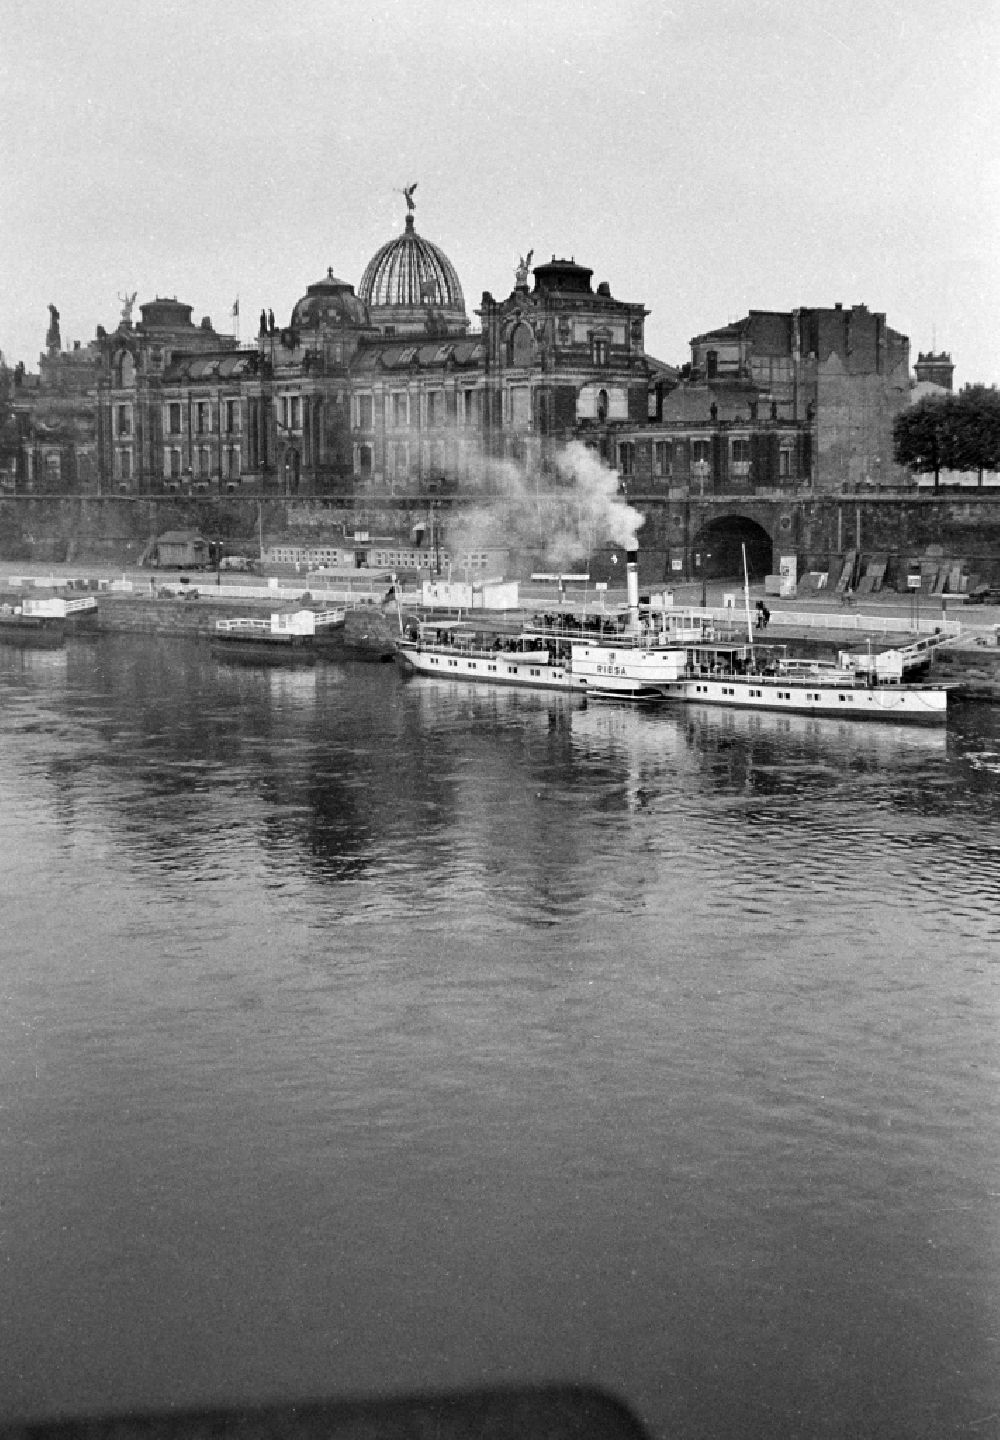 Dresden: Excursion ships and passenger ships for the transport of passengers der Weissen Flotte on street Terrassenufer on elbe river in the district Altstadt in Dresden, Saxony on the territory of the former GDR, German Democratic Republic